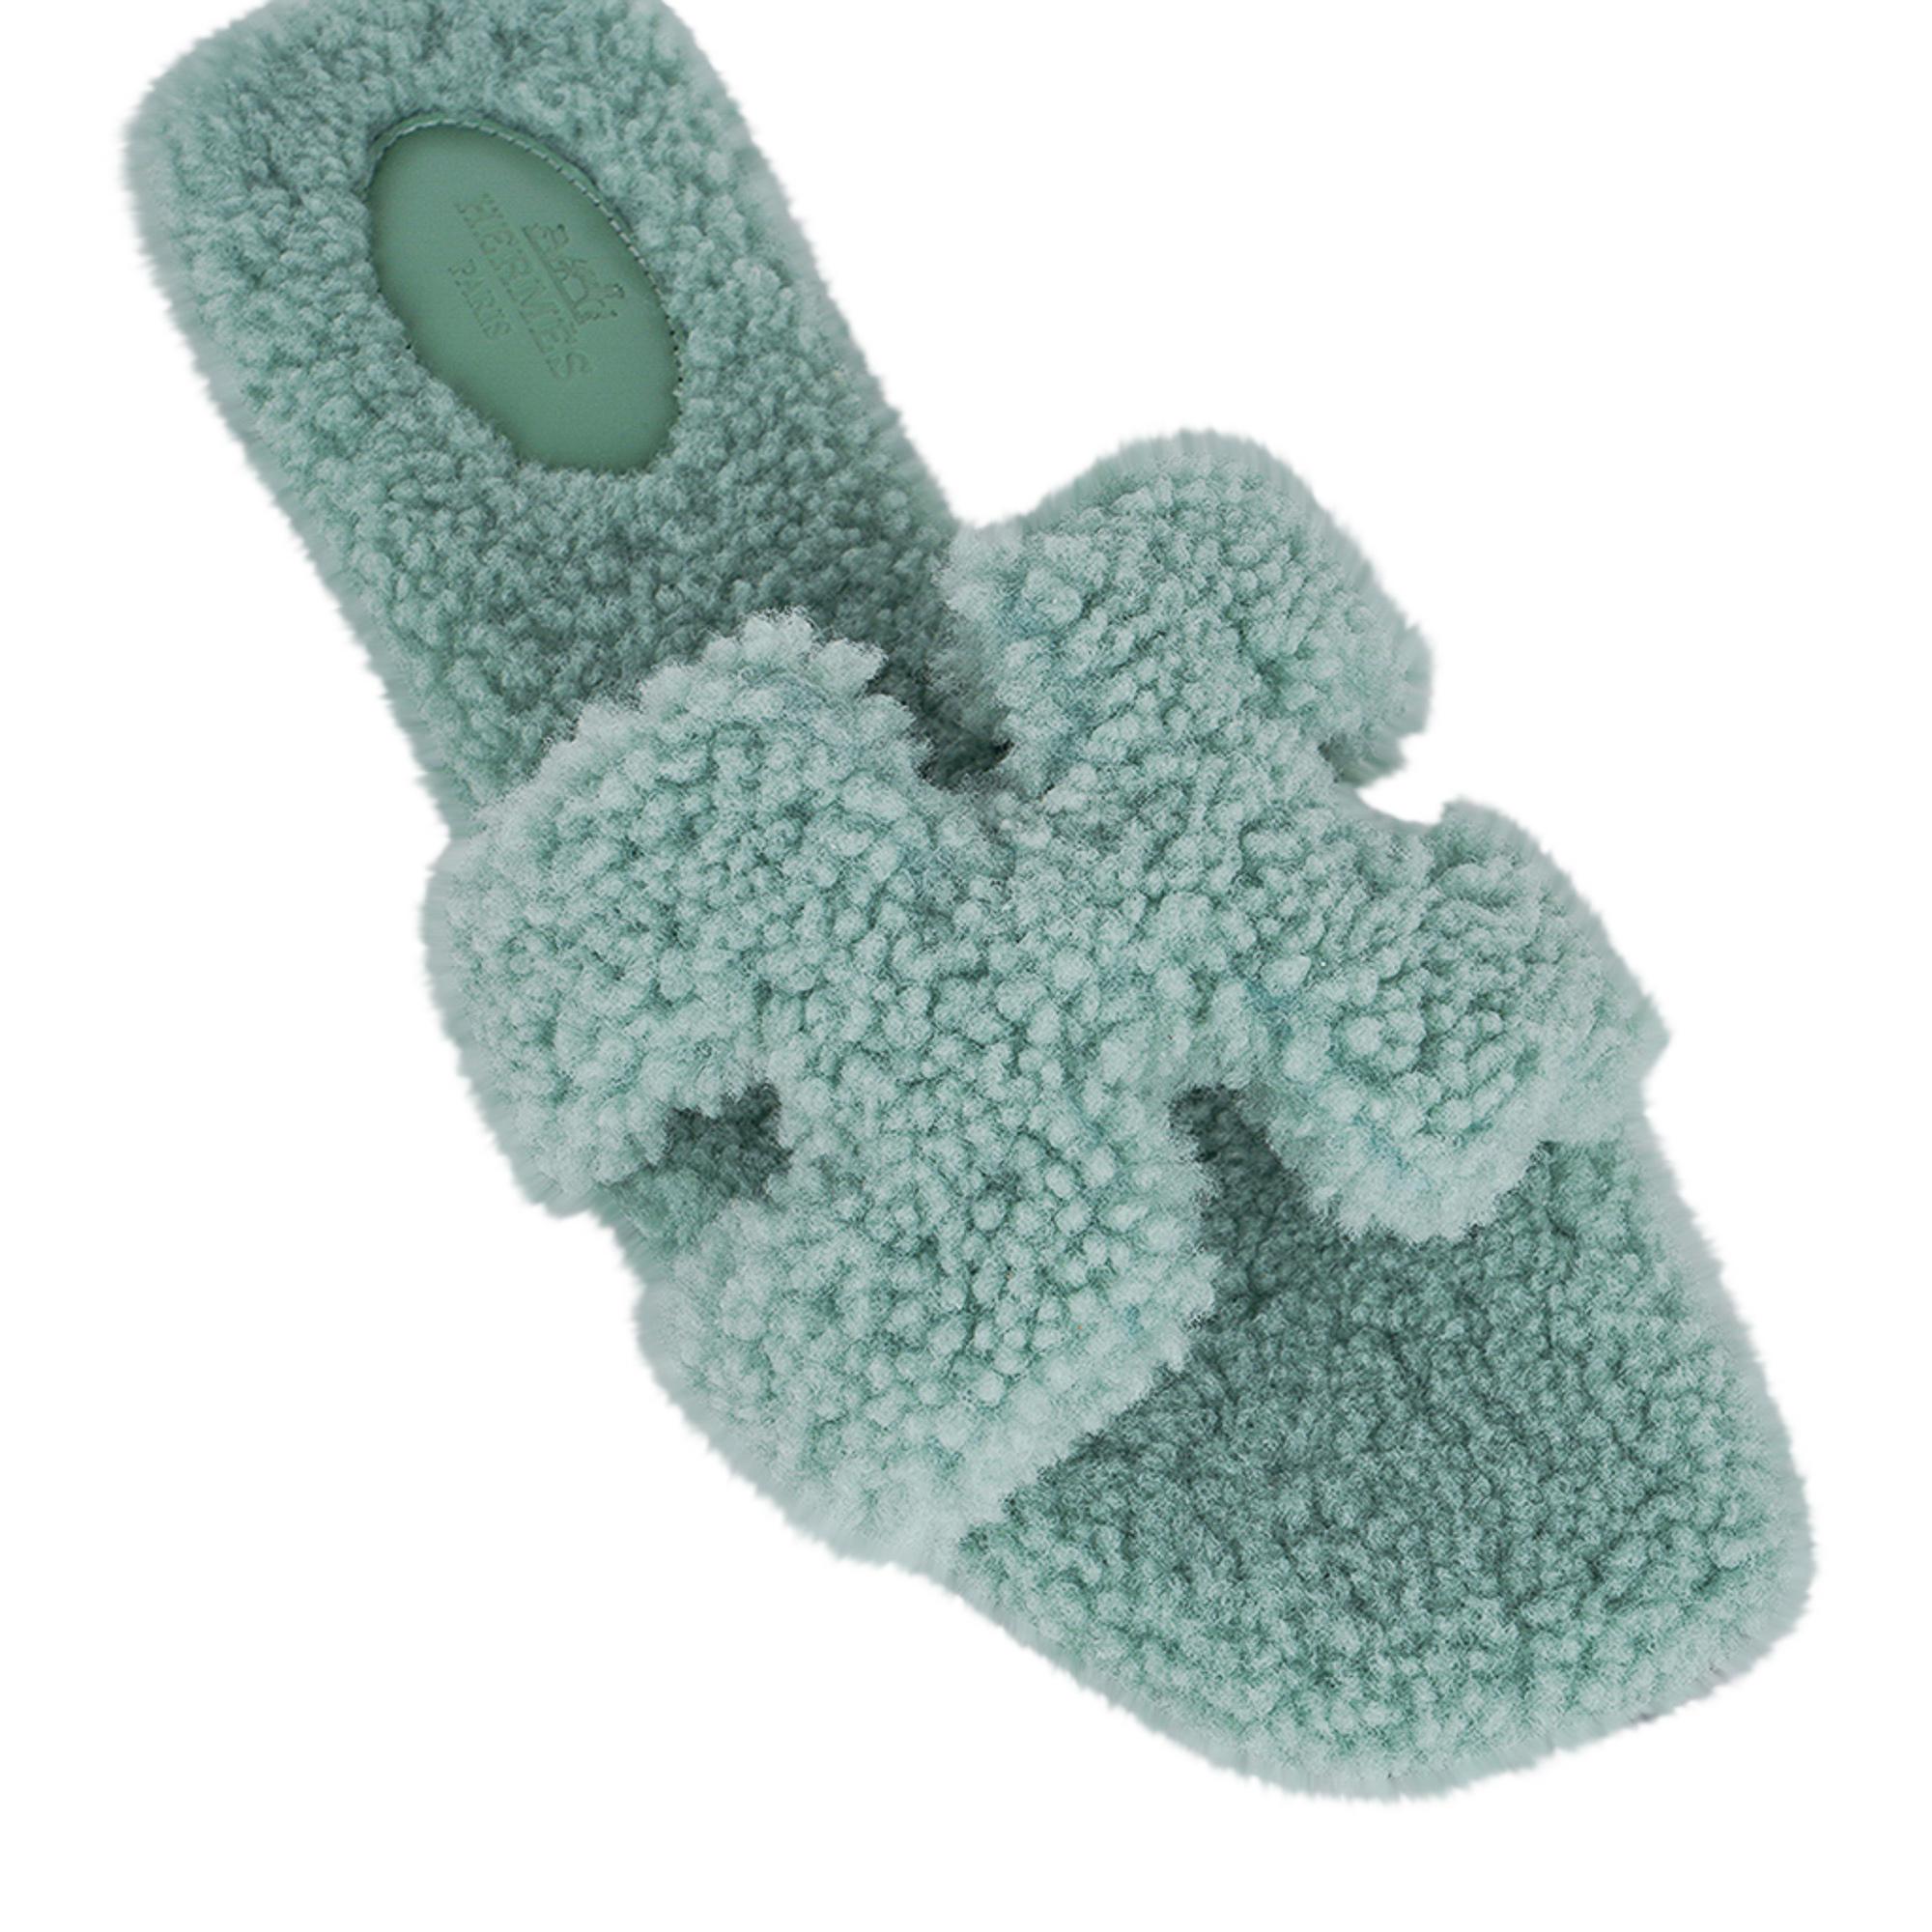 Mightychic offers a pair of Hermes Oran Shearling limited edition flat sandal slide featured in Vert D'Eau.
This stunning pale green Hermes Oran shearling sandal is foot flirting perfection!
Embossed Hermes Paris leather insole.
Wood heel.
Comes